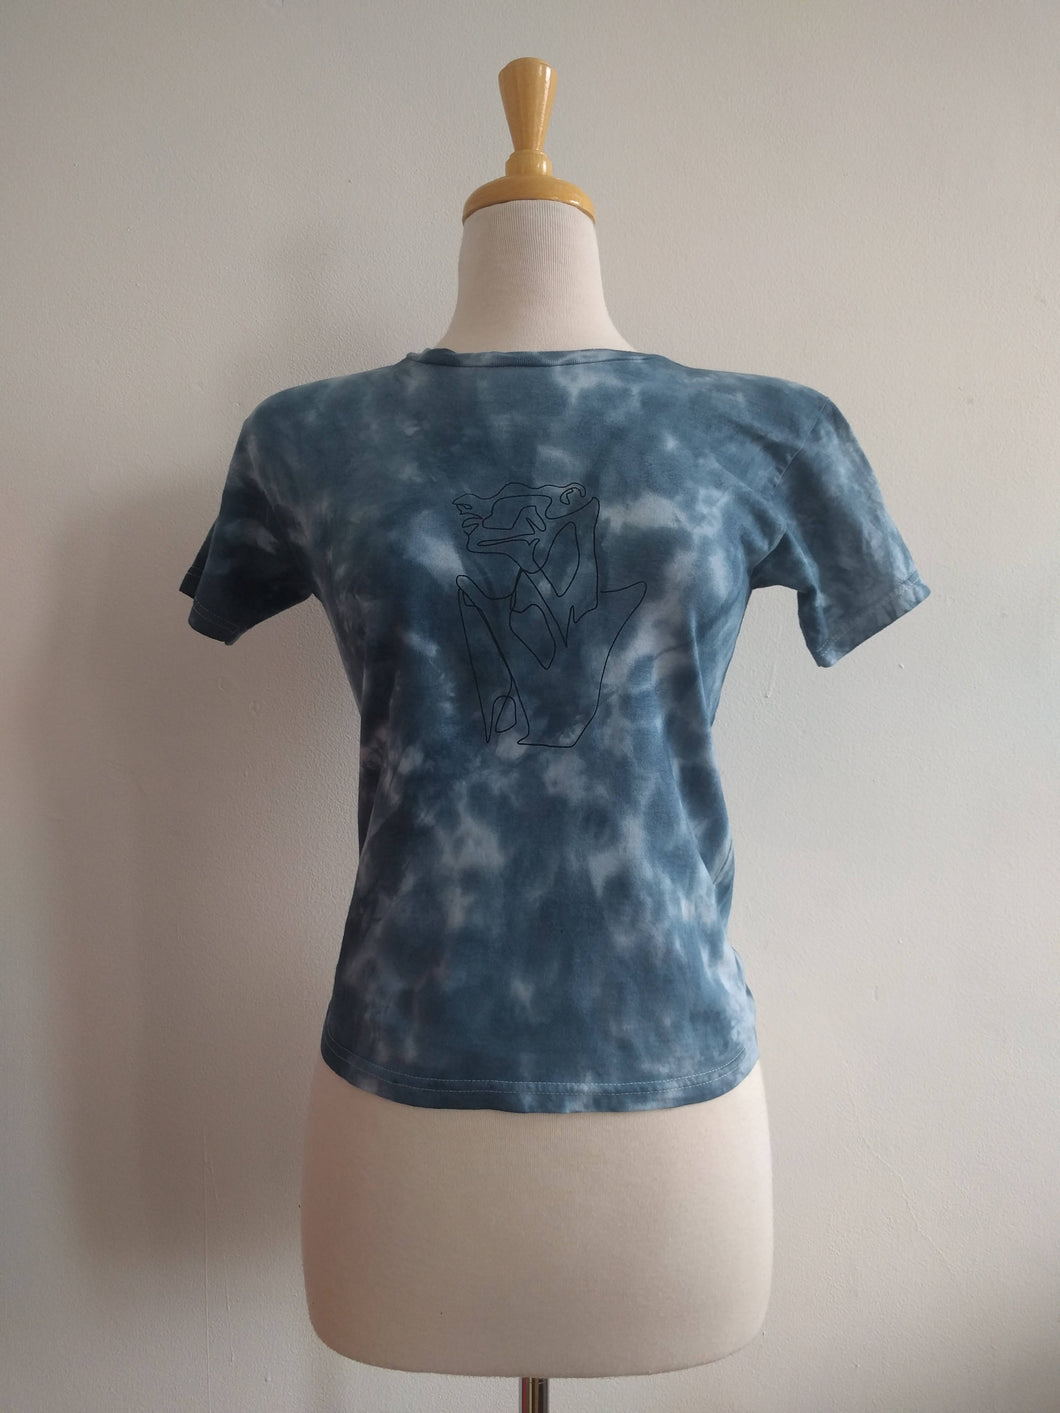 tie dyed upcycled one of a kind screen printed tee, ‘oneline bust’ — small